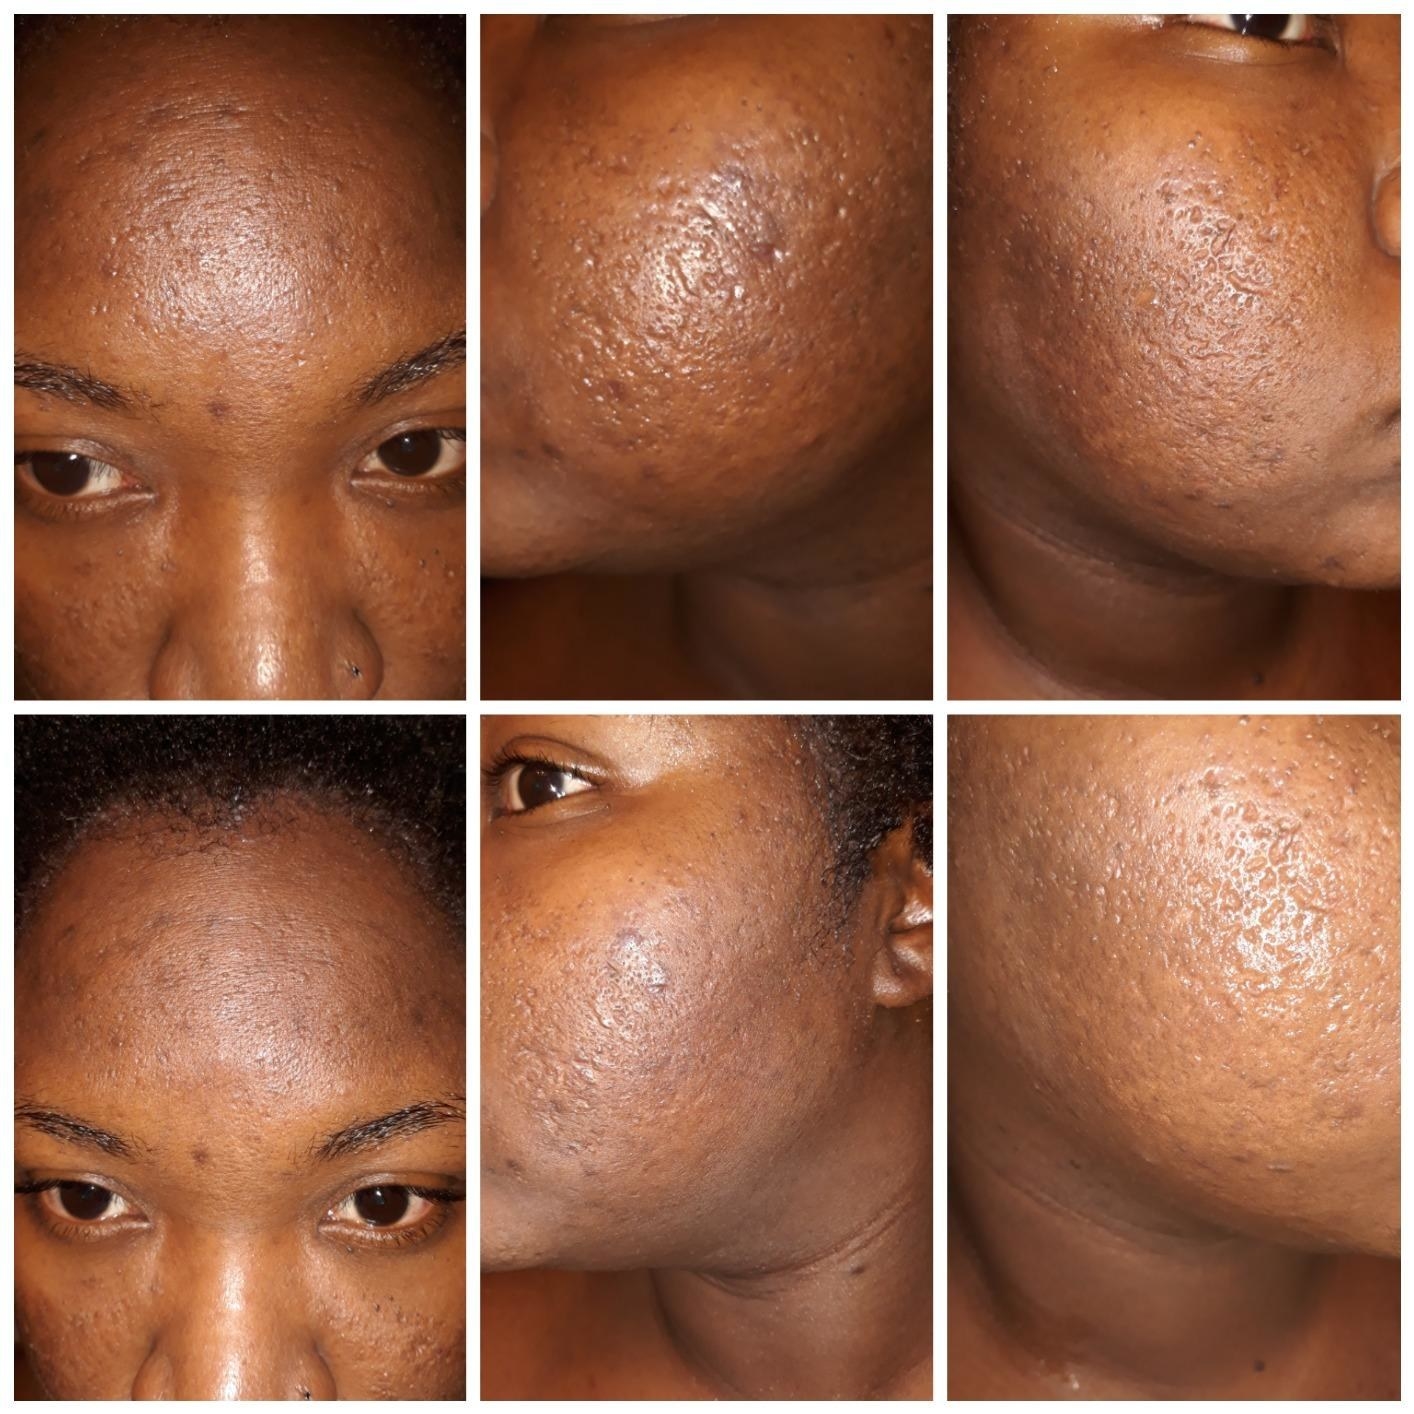 Before and after photos of reviewer showing the scrub helped brighten their skin tone and even out hyperpimentation